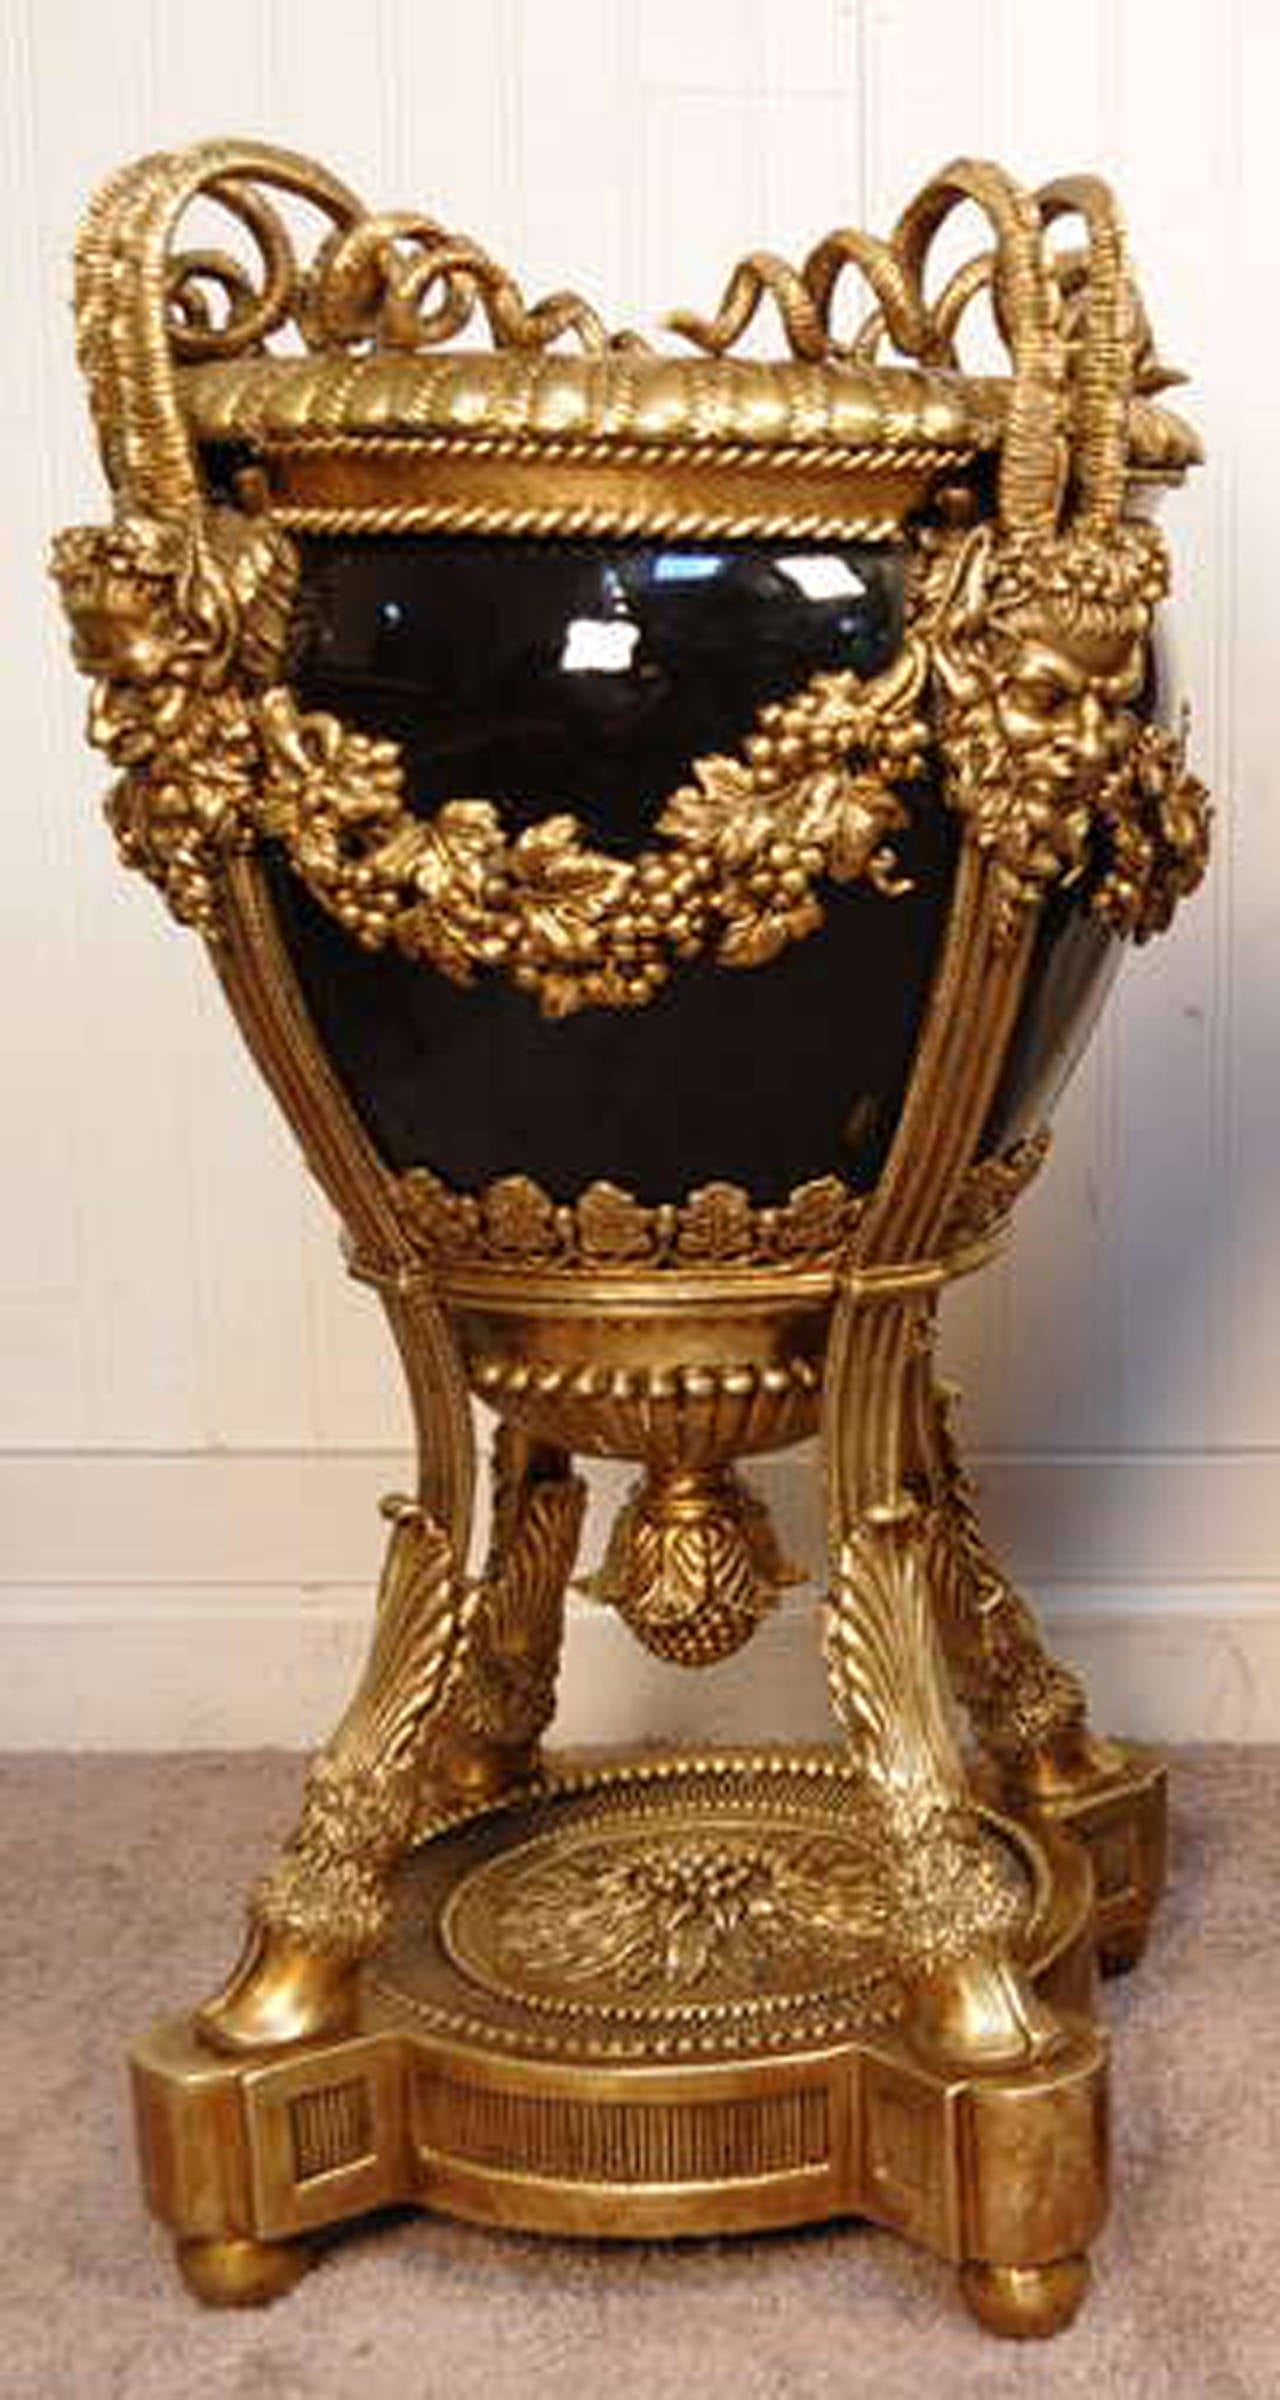 Breathtaking bronze and black porcelain figural urn or planter in the French Empire or Louis XVI taste from the late 20th century. The piece features scrolling horned faces, hairy hoof feet, grape vine draped wreaths, acorn finials and a fantastic